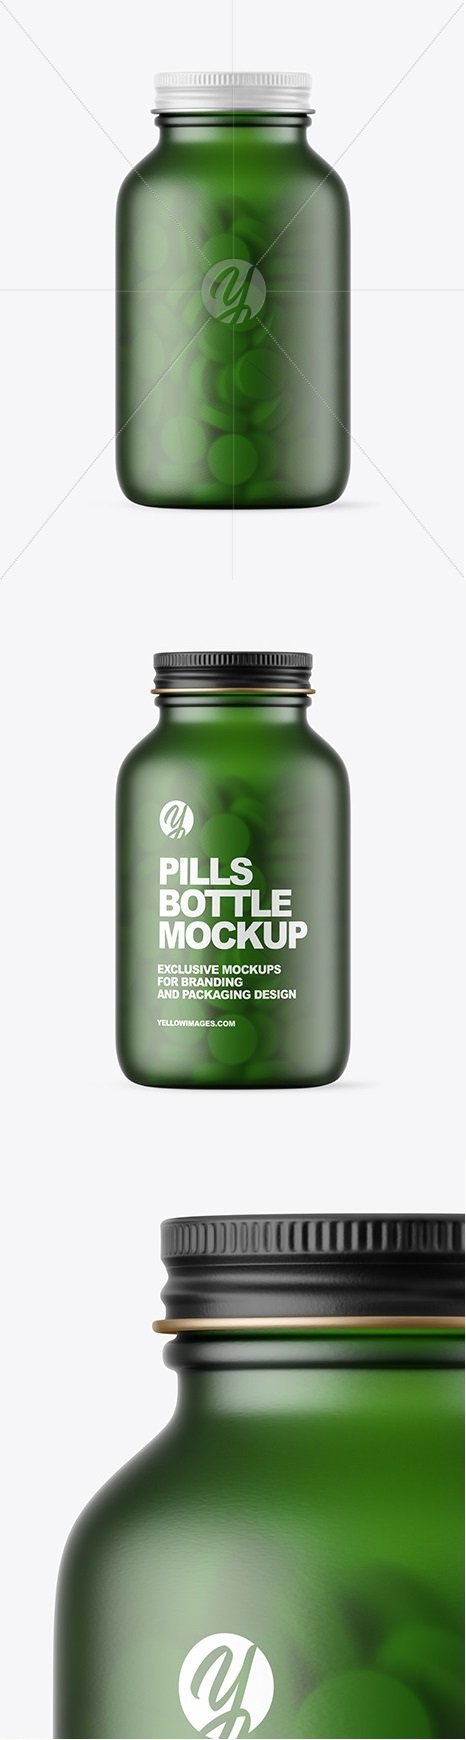 Download Download Frosted Green Glass Pills Bottle Mockup 59069 Softarchive PSD Mockup Templates